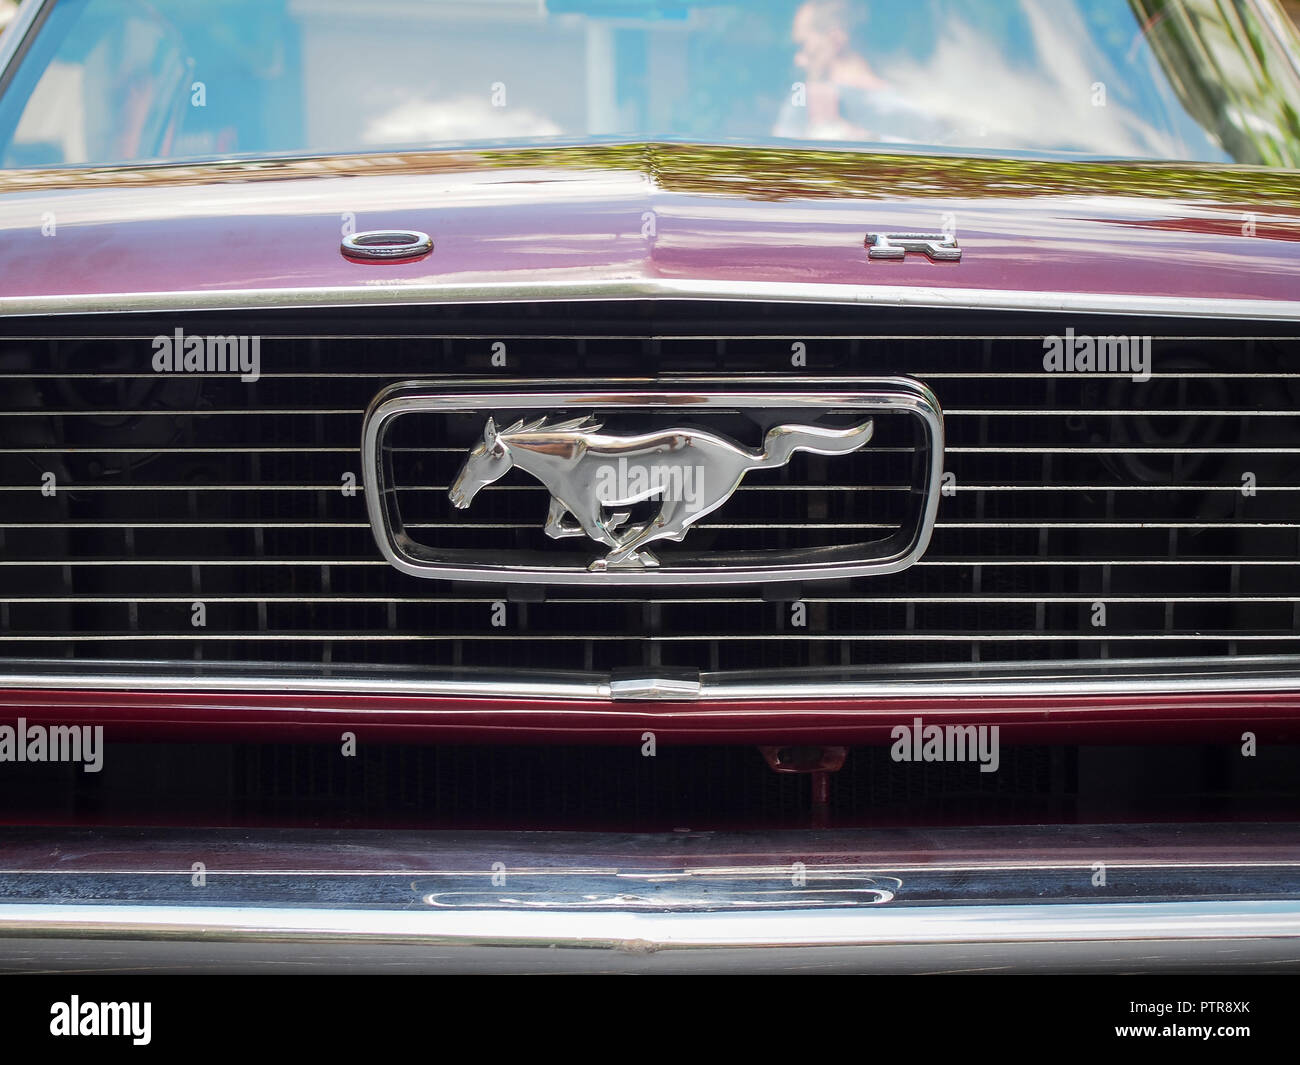 VILNIUS, LITHUANIA-JUNE 10, 2017: Real Ford Mustang first Generation horse logo on the radiator grill Stock Photo